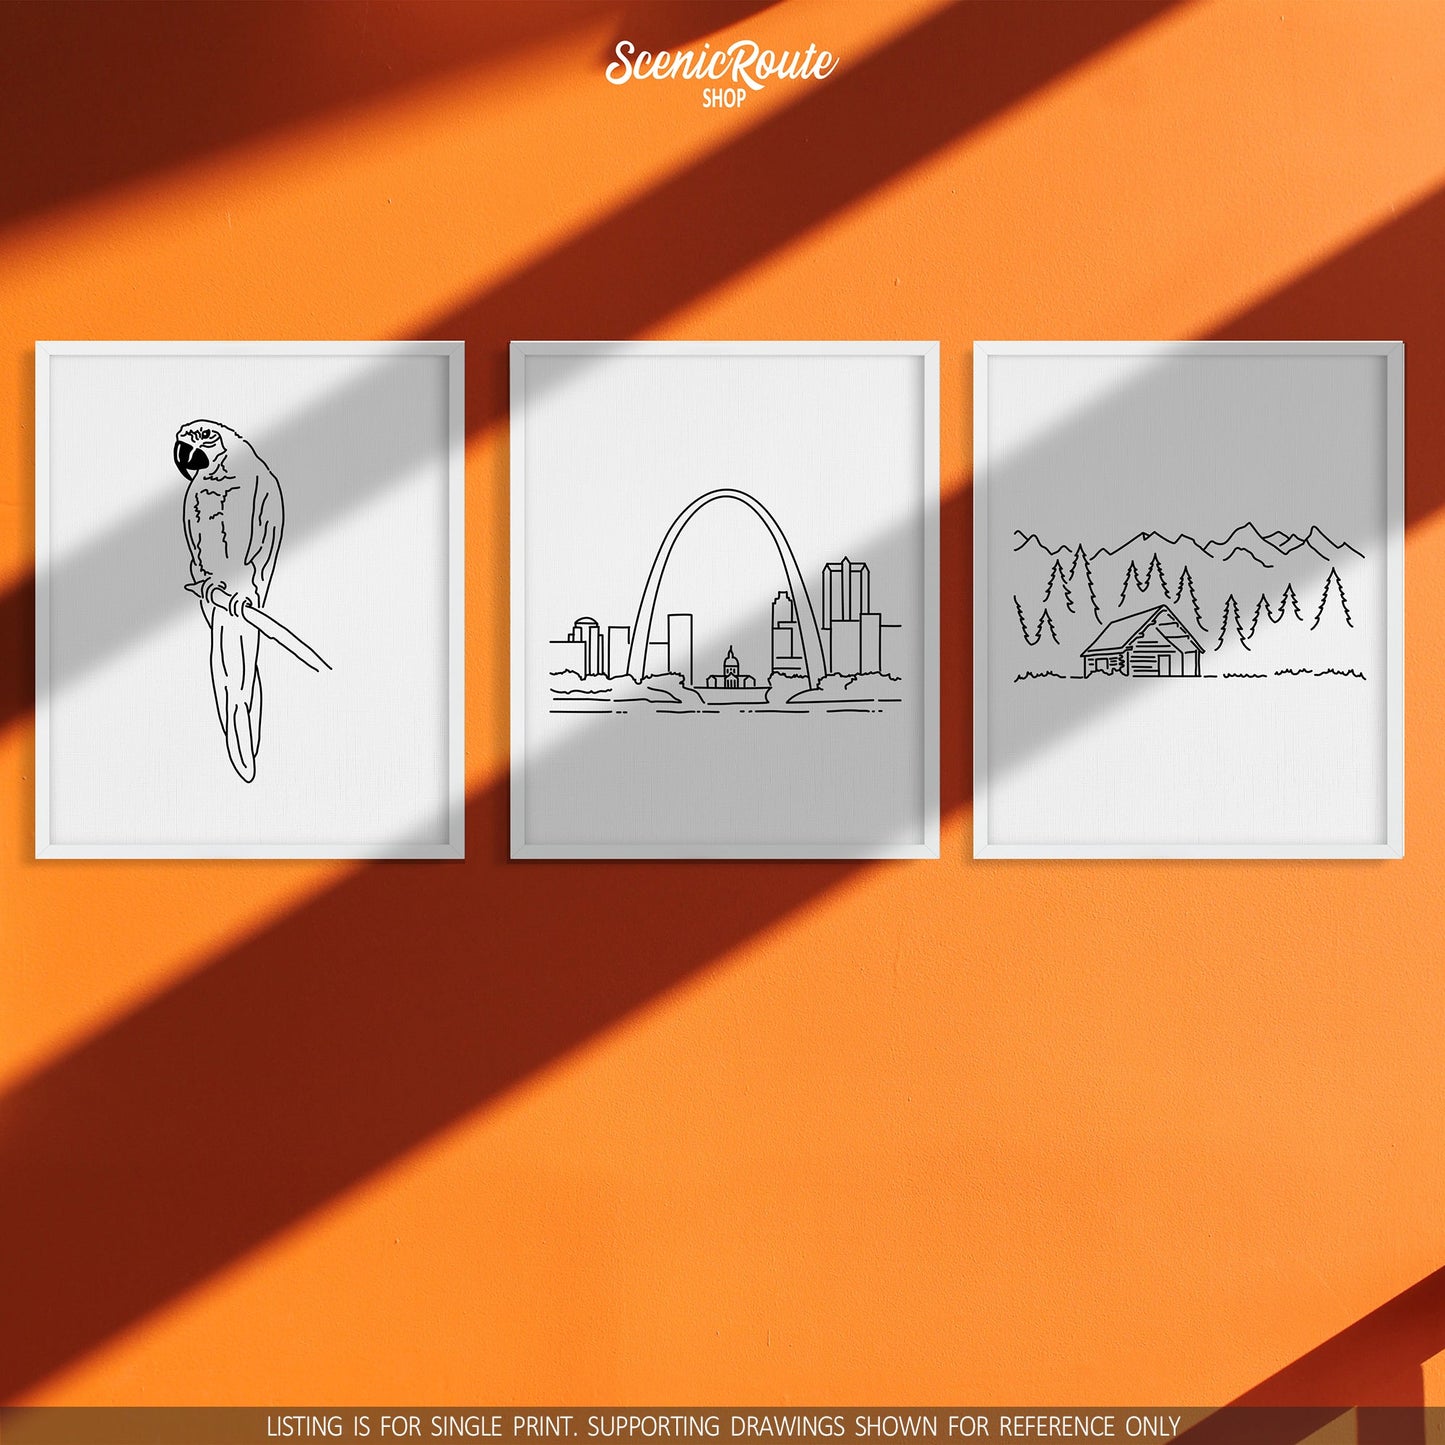 A group of three framed drawings on a orange wall. The line art drawings include a Parrot, Saint Louis Skyline, and Cabin